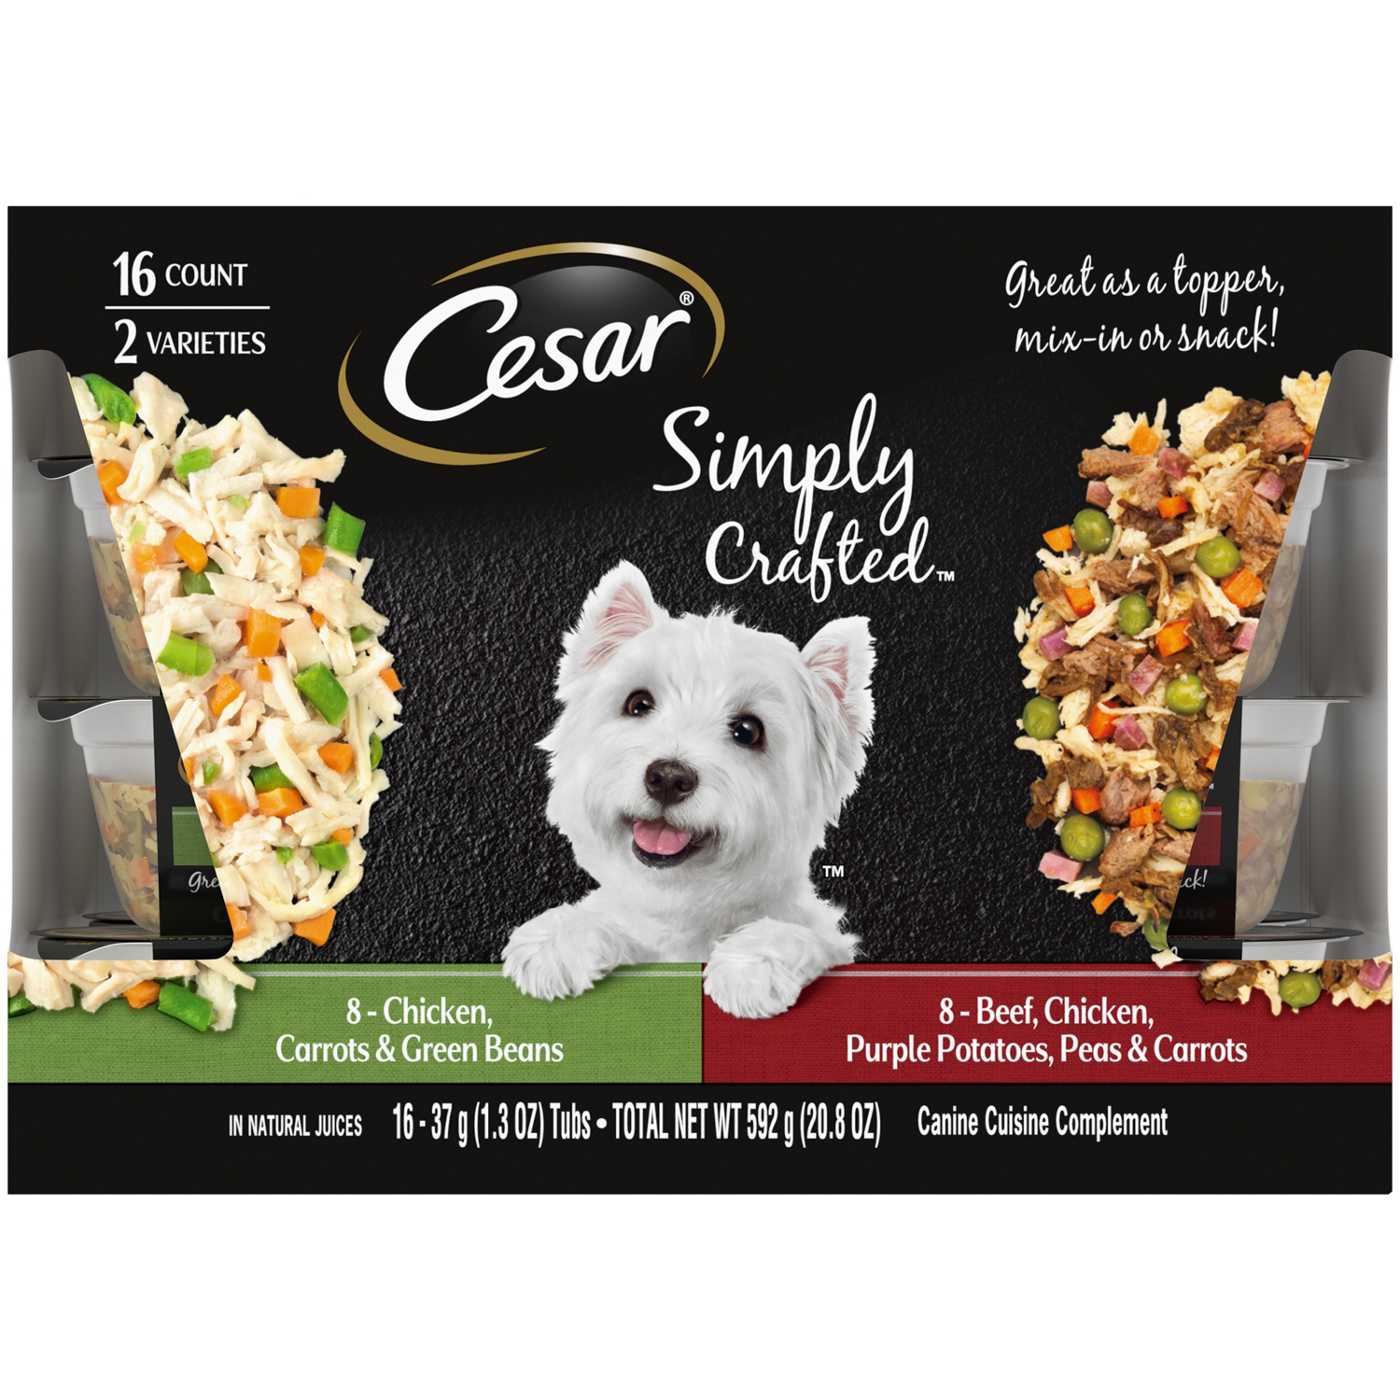 Cesar Simply Crafted Wet Dog Food Complements Variety Pack; image 1 of 2